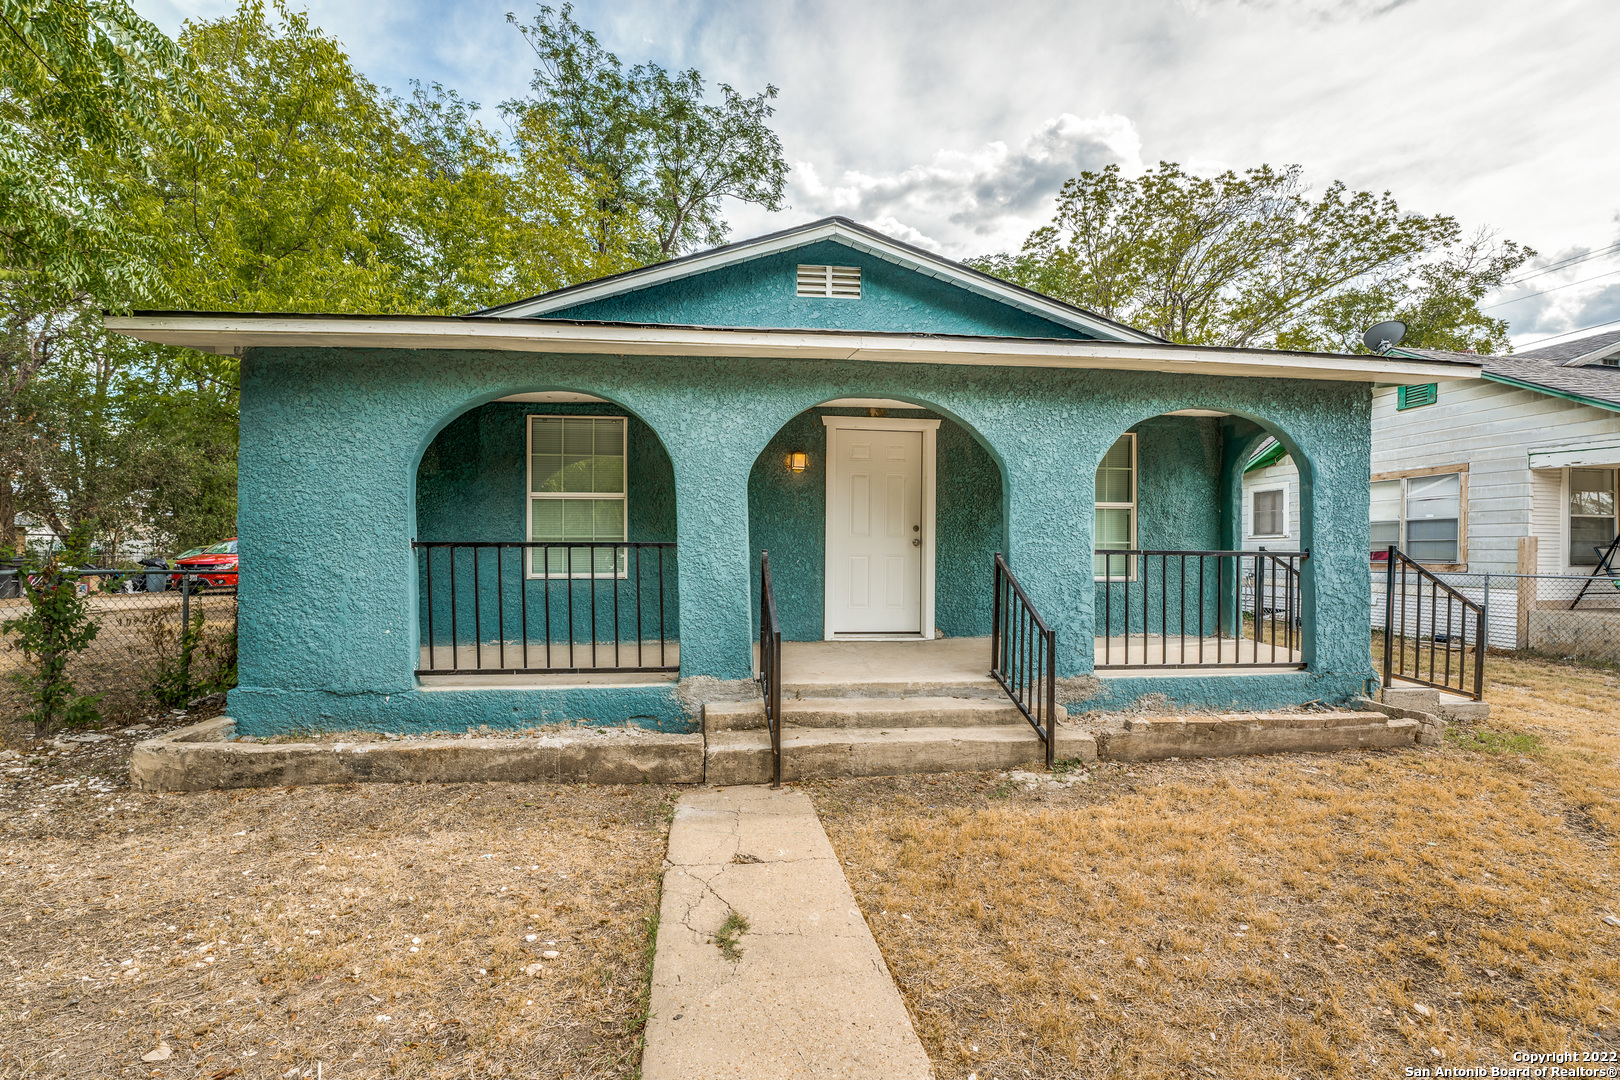 Fully updated home ready for move in!! New electrical, plumbing, roof, flooring, windows. Big yard for entertaining! Easy access to 35,410 and HWY 90. About 5 minutes from Lackland AFB. Schedule your tour today!